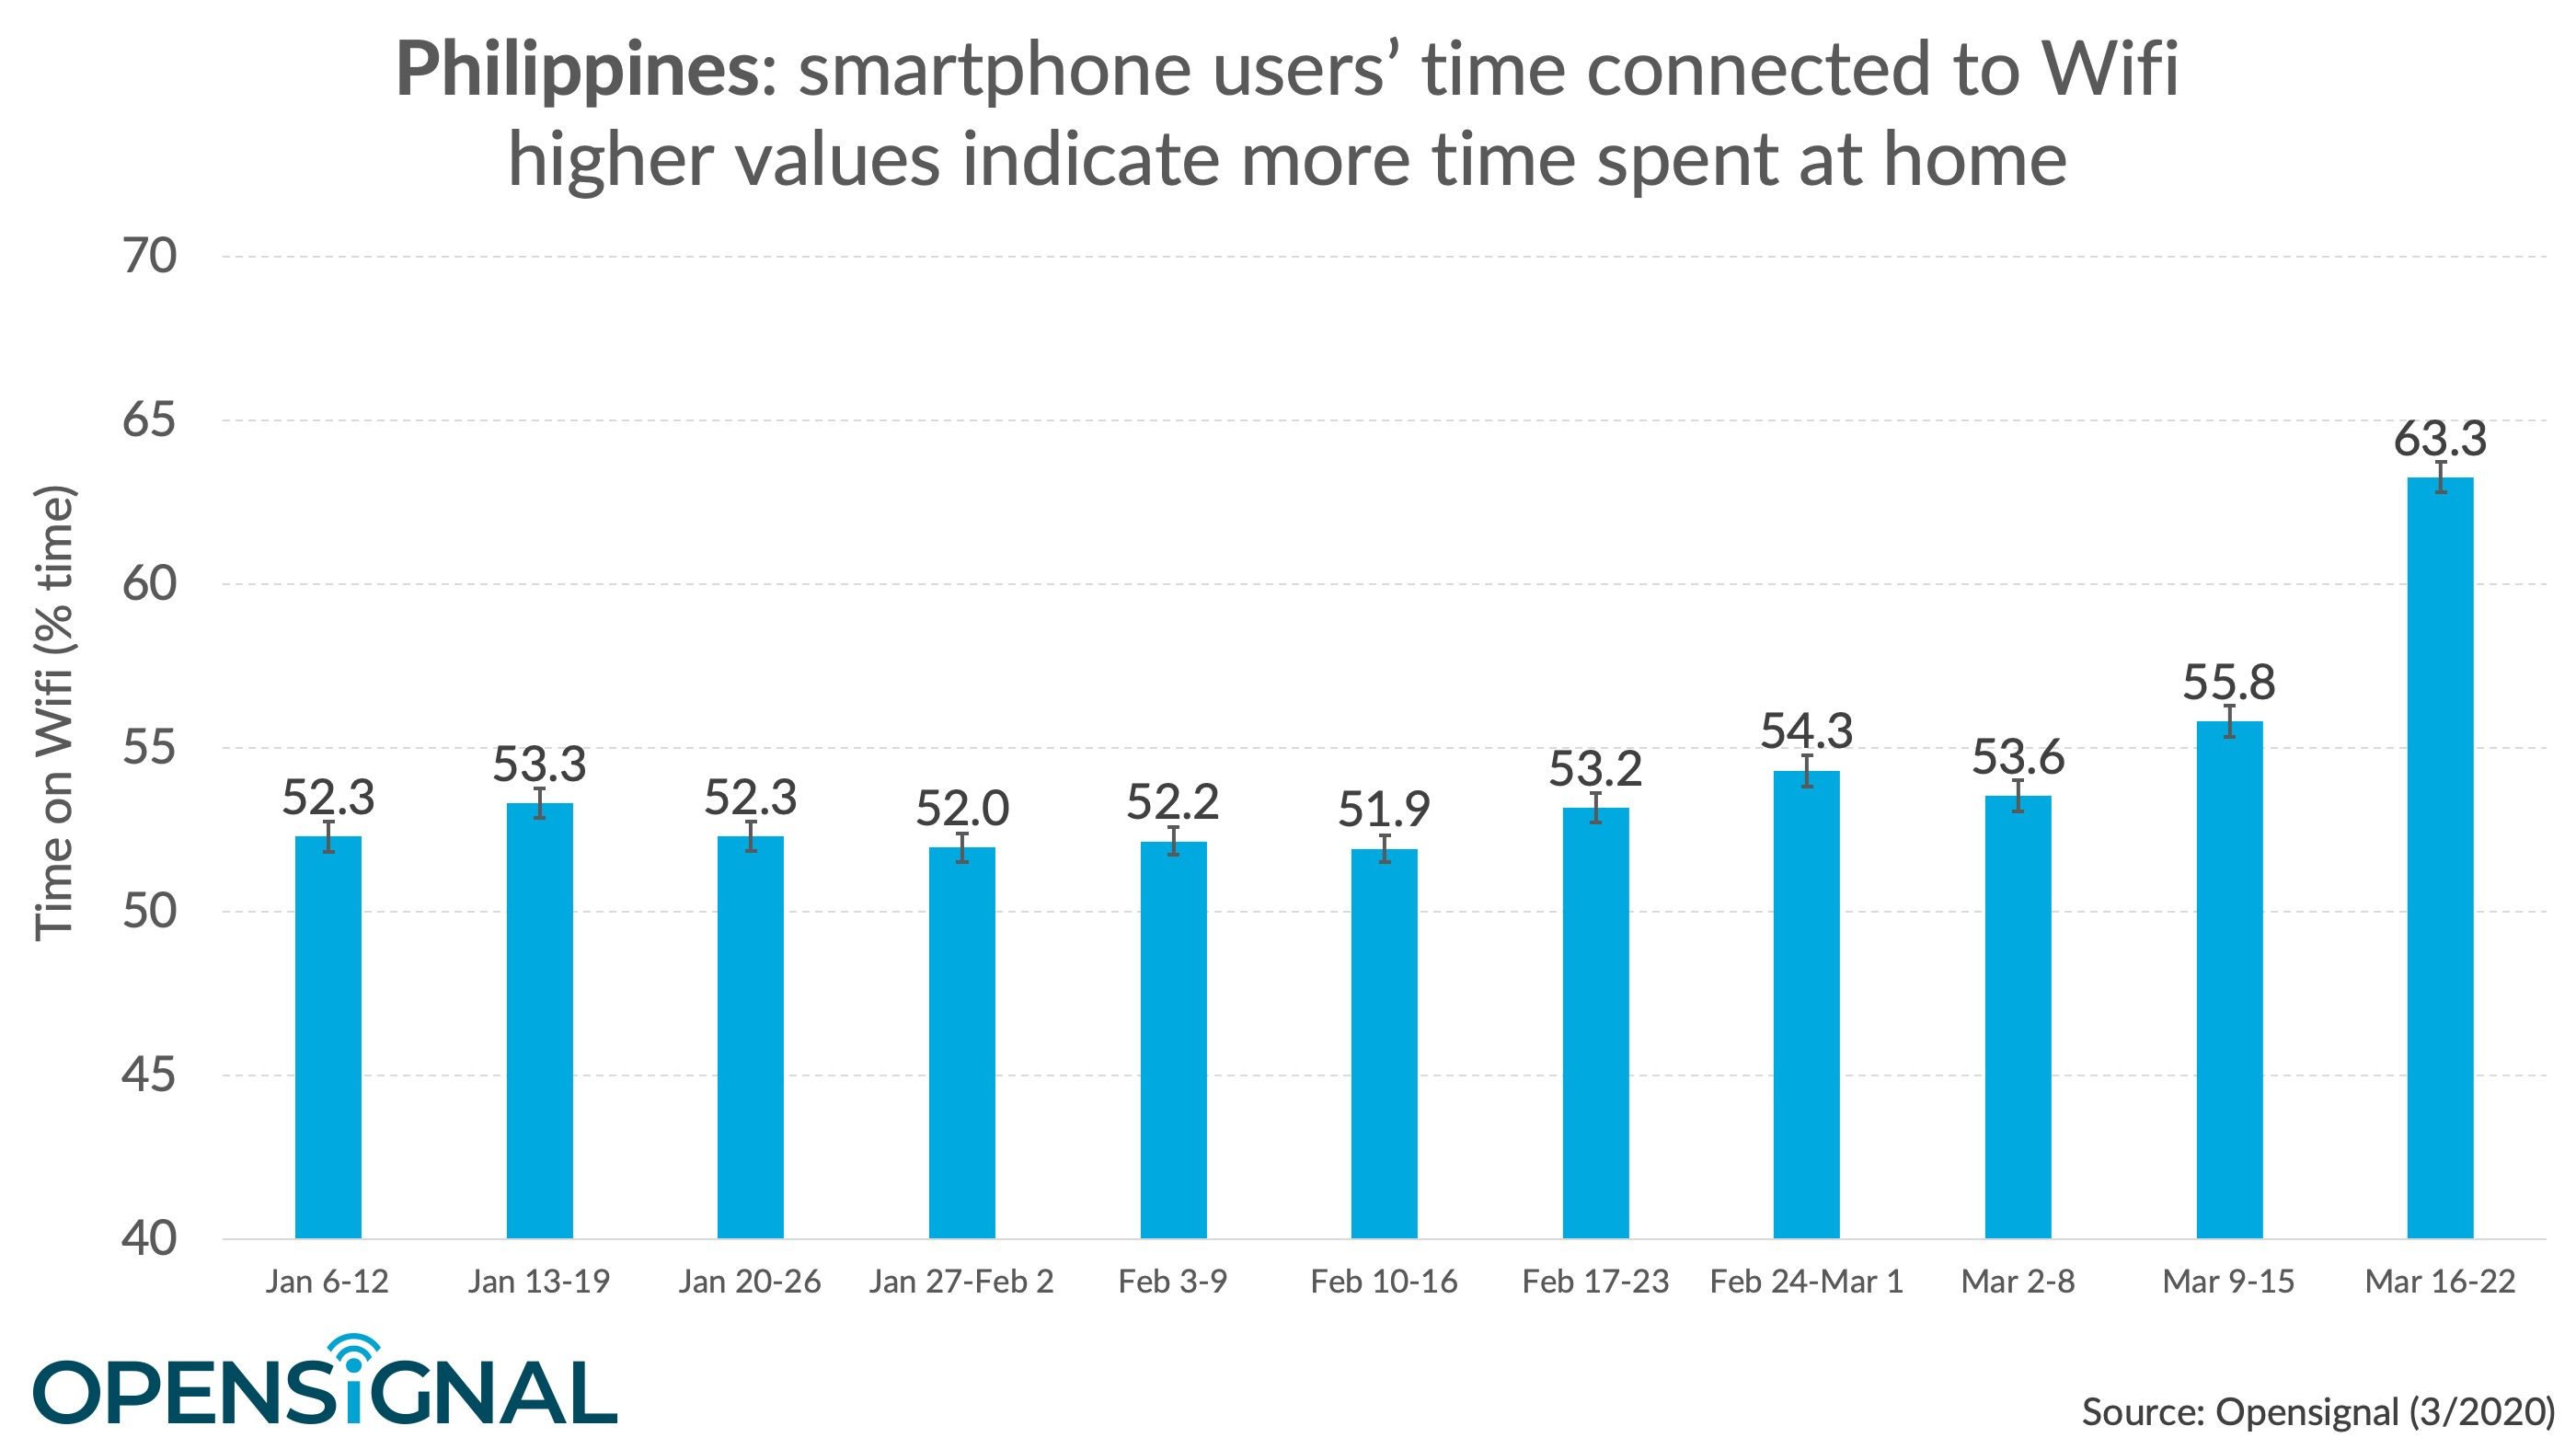 SMARTPHONES ON WI-FI. This table indicates Philippine smartphone uses' time spent connected to Wi-Fi on given weeks. Image from OpenSignal 